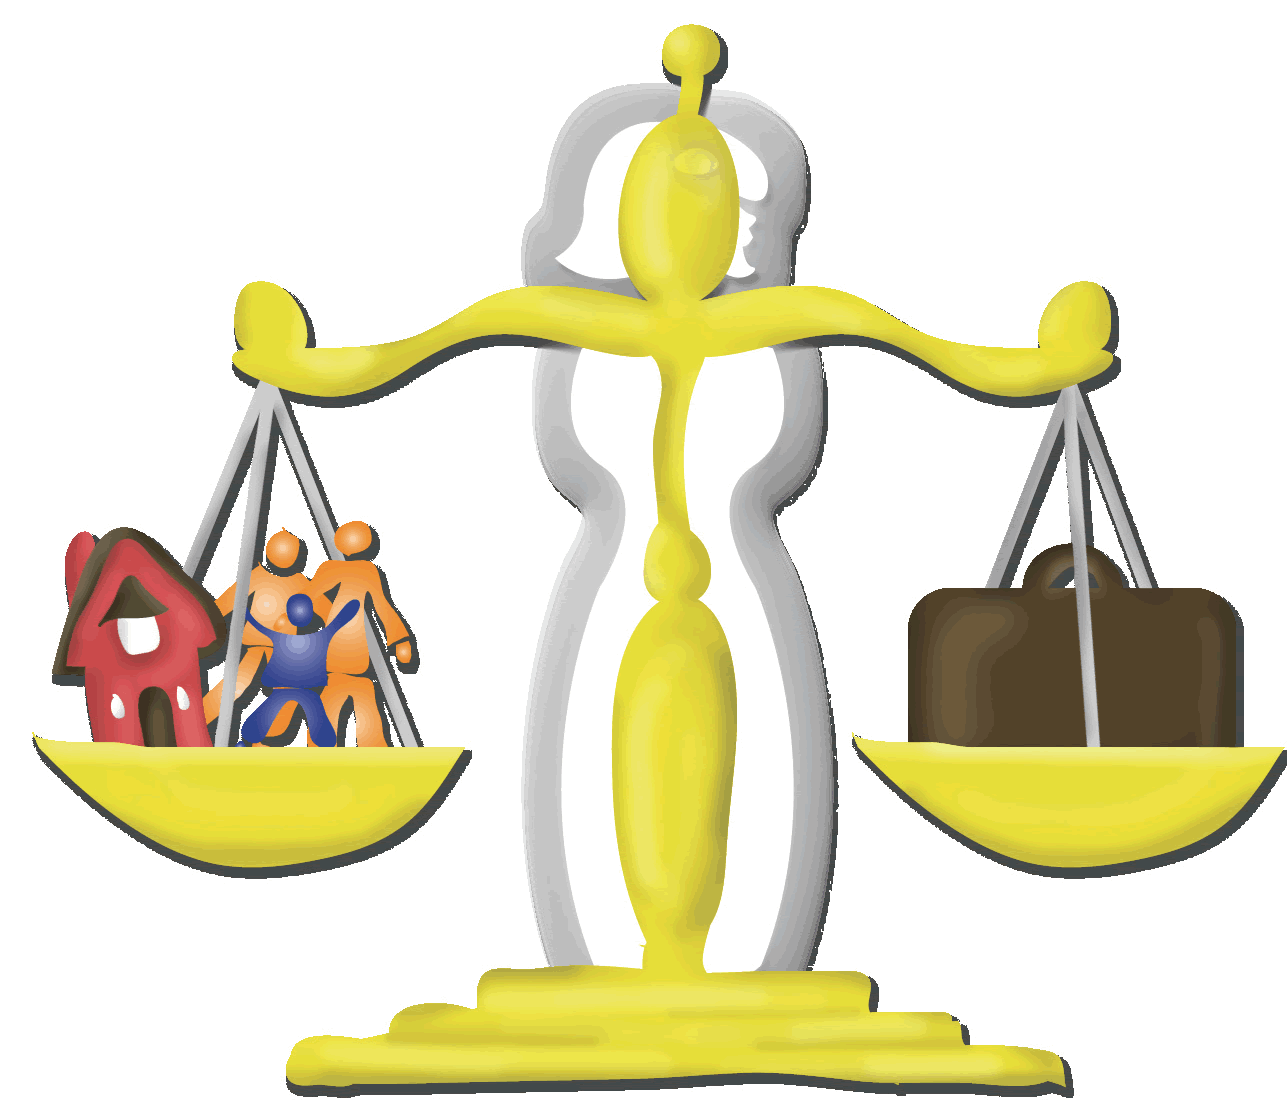 Clipart definition case law. Legal terminology image of